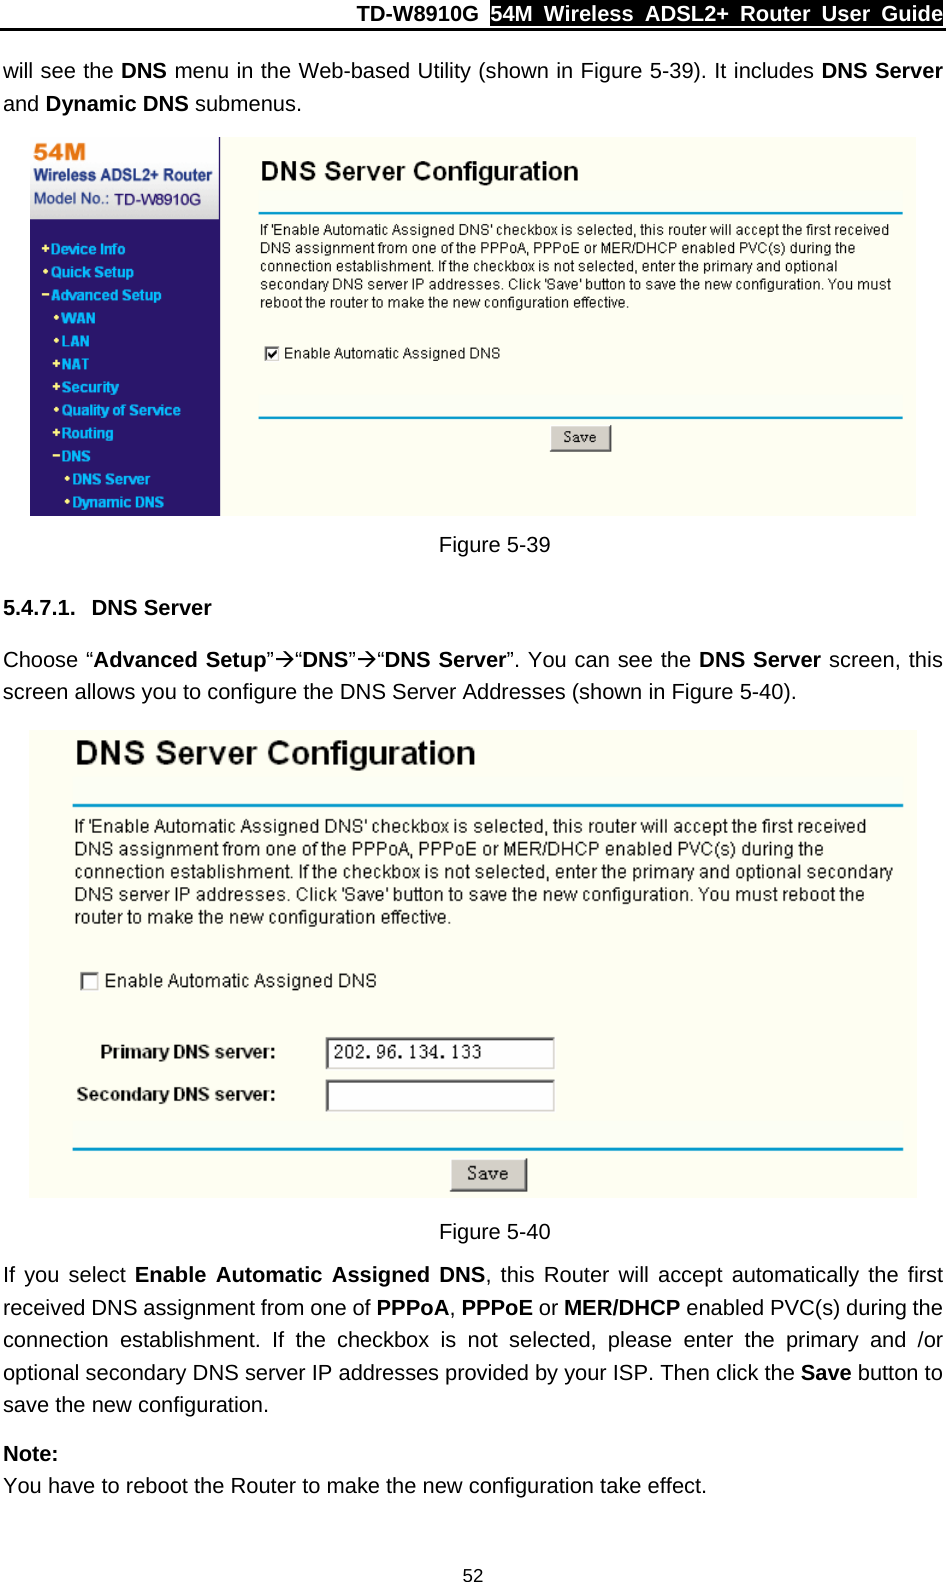 TD-W8910G  54M Wireless ADSL2+ Router User Guide  52will see the DNS menu in the Web-based Utility (shown in Figure 5-39). It includes DNS Server and Dynamic DNS submenus.  Figure 5-39 5.4.7.1. DNS Server Choose “Advanced Setup”Æ“DNS”Æ“DNS Server”. You can see the DNS Server screen, this screen allows you to configure the DNS Server Addresses (shown in Figure 5-40).  Figure 5-40 If you select Enable Automatic Assigned DNS, this Router will accept automatically the first received DNS assignment from one of PPPoA, PPPoE or MER/DHCP enabled PVC(s) during the connection establishment. If the checkbox is not selected, please enter the primary and /or optional secondary DNS server IP addresses provided by your ISP. Then click the Save button to save the new configuration.   Note: You have to reboot the Router to make the new configuration take effect. 